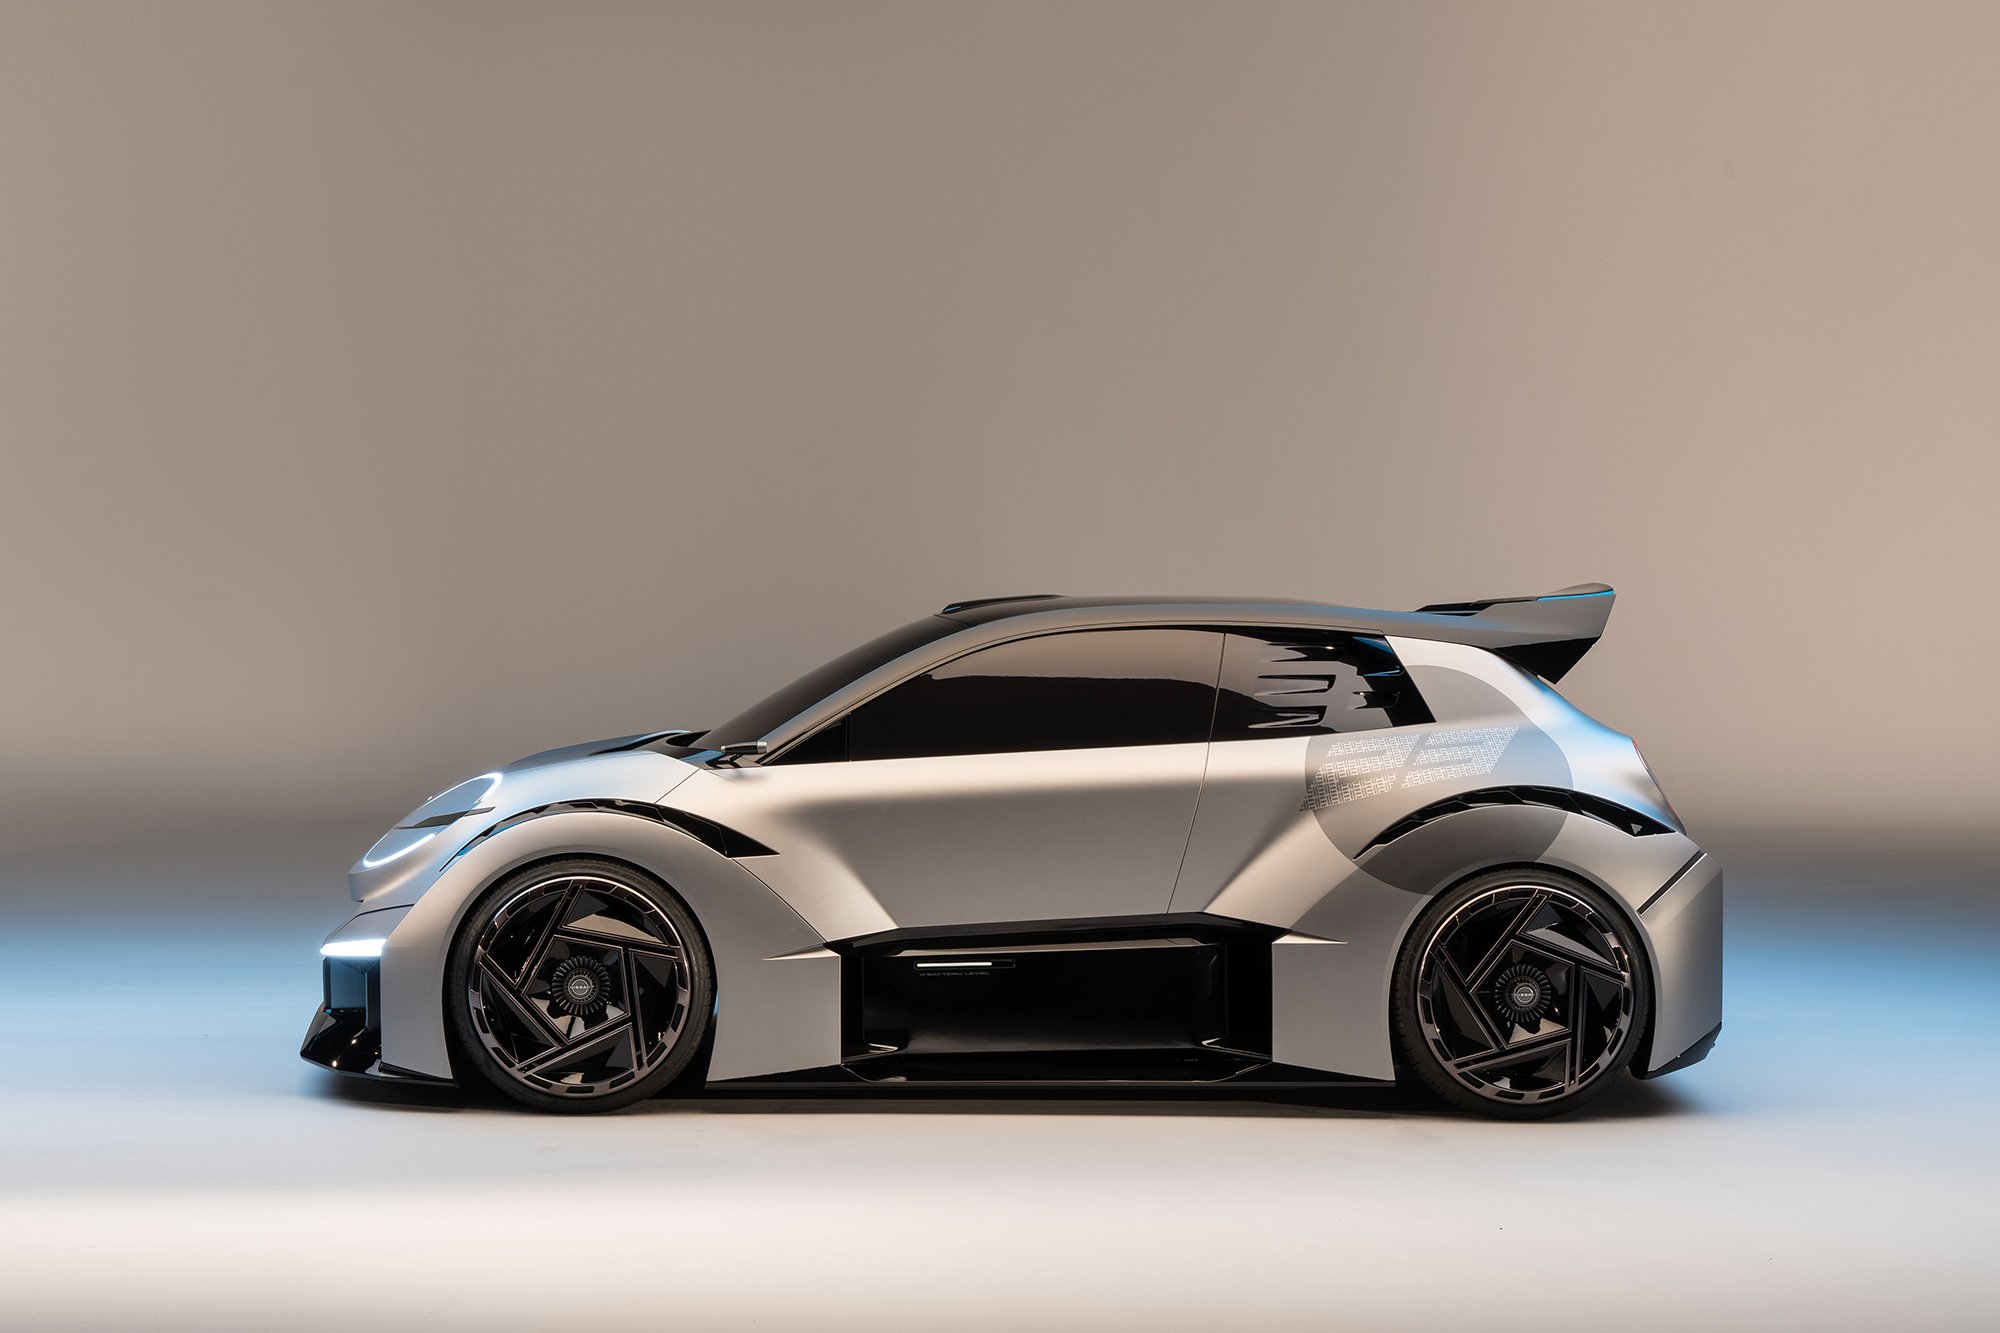 The exterior design and side view of the Nissan Concept 20-23